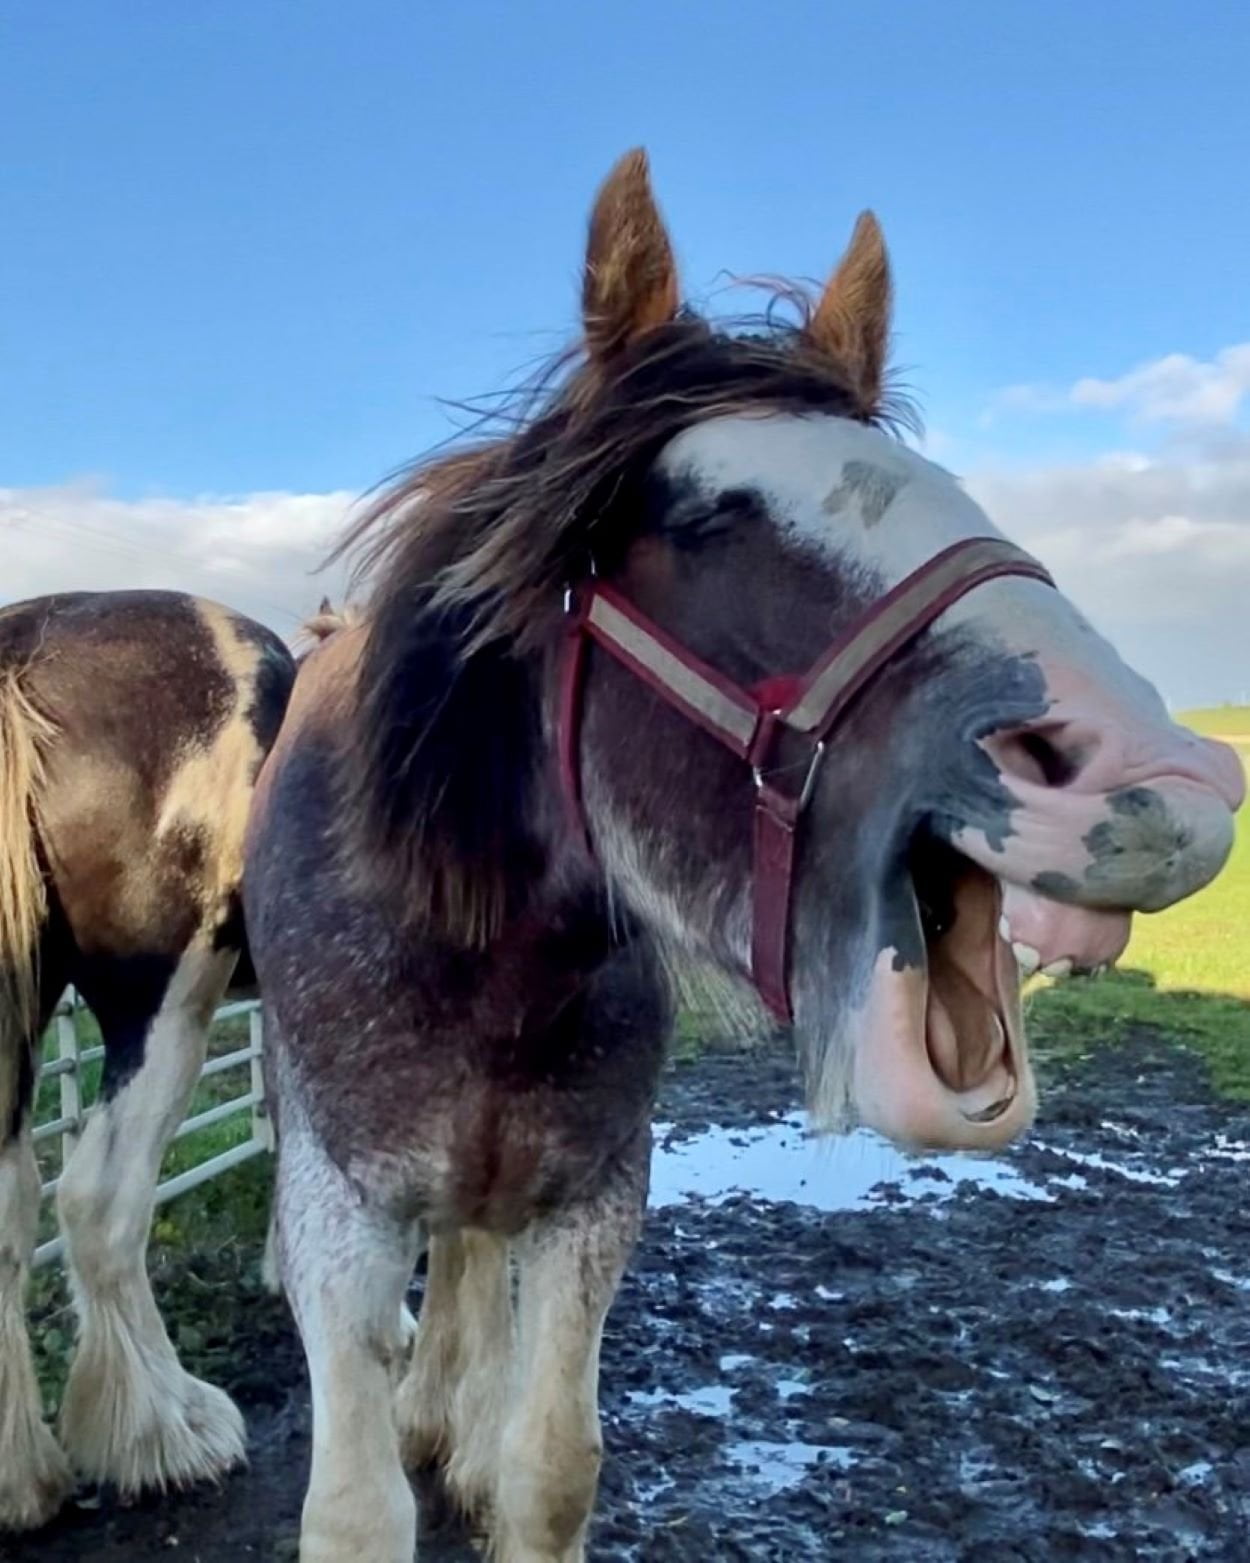 Clydesdale horse yawning at Strathorn